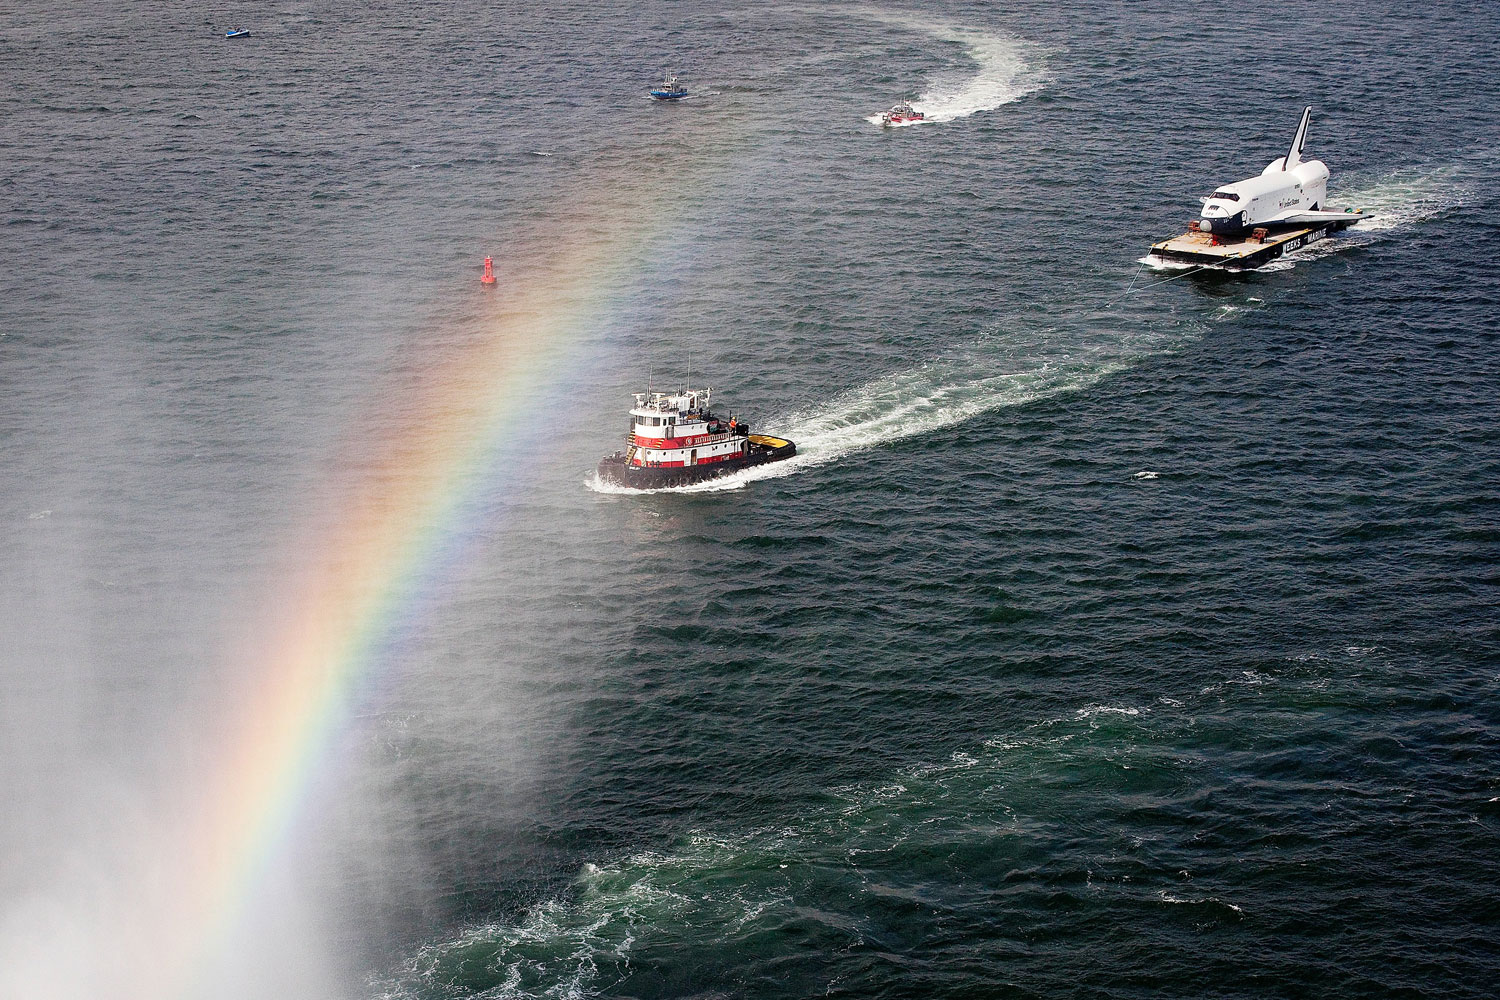 Future Space Exploration
                              
                              June 3, 2012  Space Shuttle Enterprise is carried by barge, behind a rainbow appearing in the mist sprayed by a fireboat near New York City.